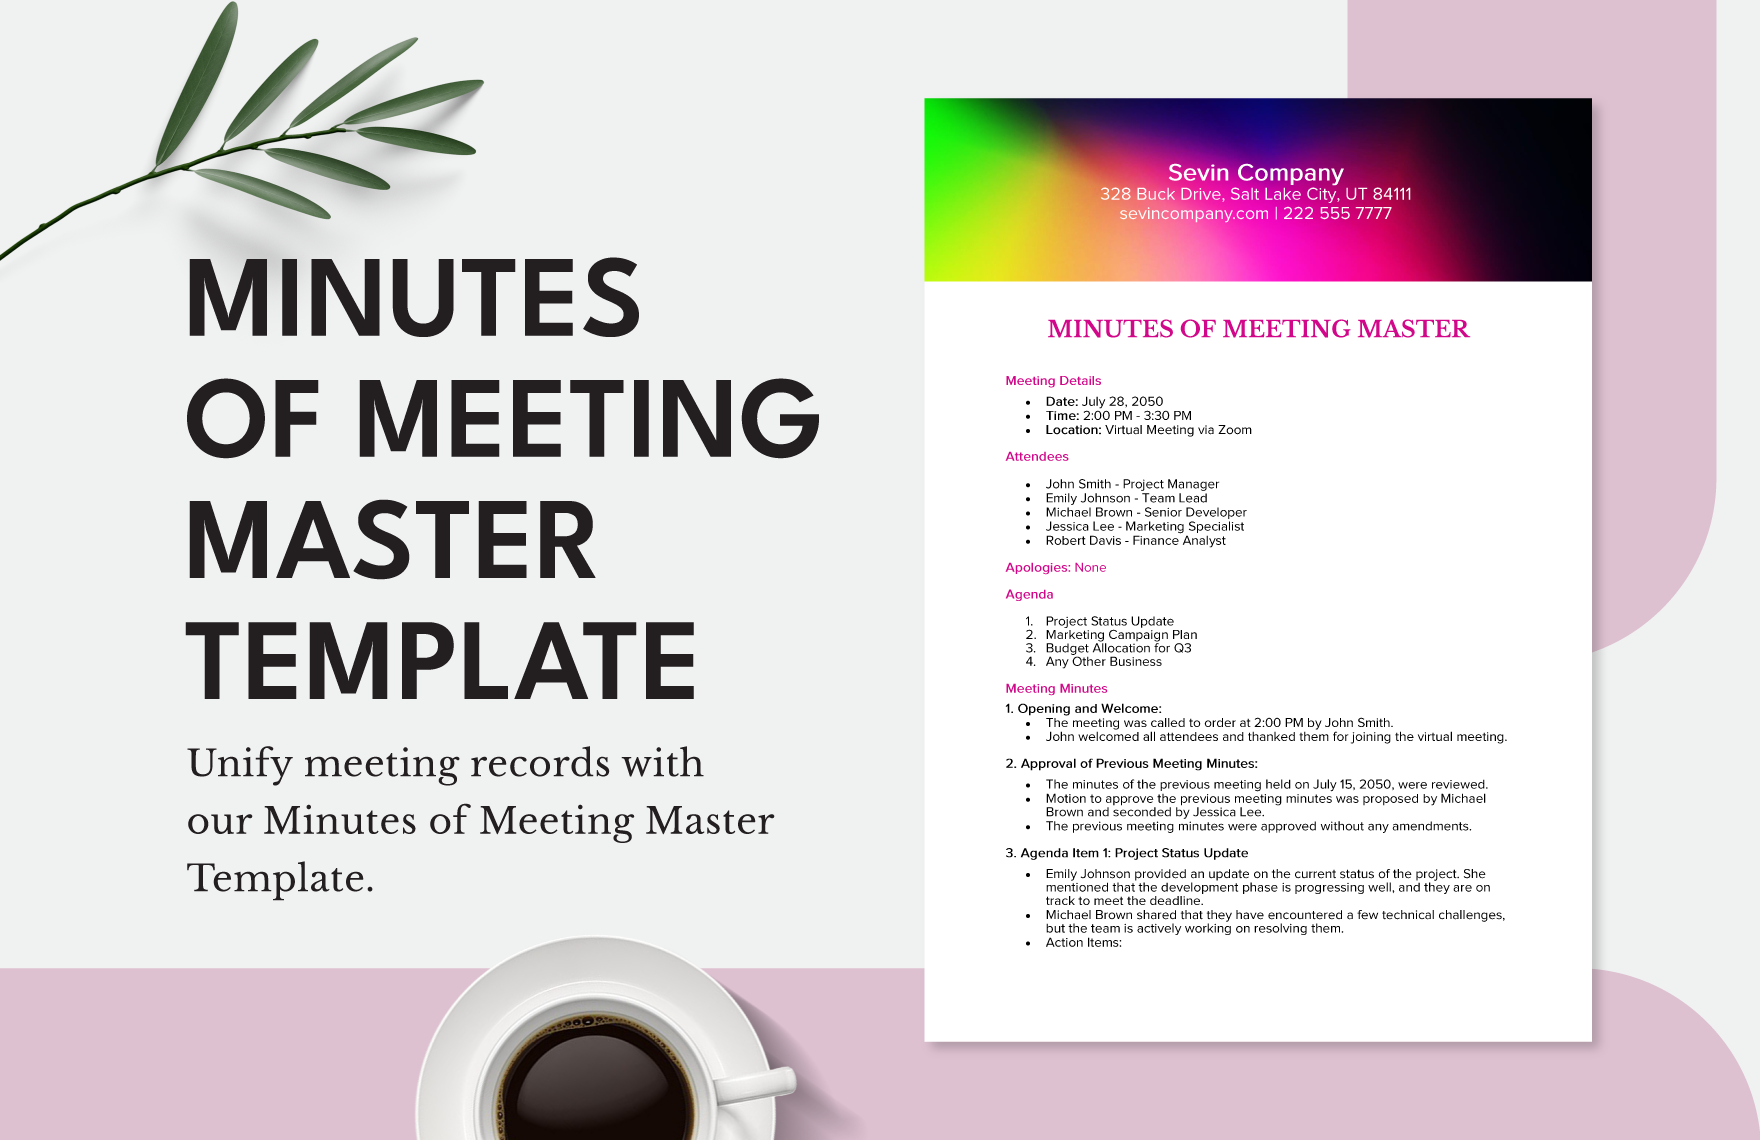 Minutes of Meeting Master Template